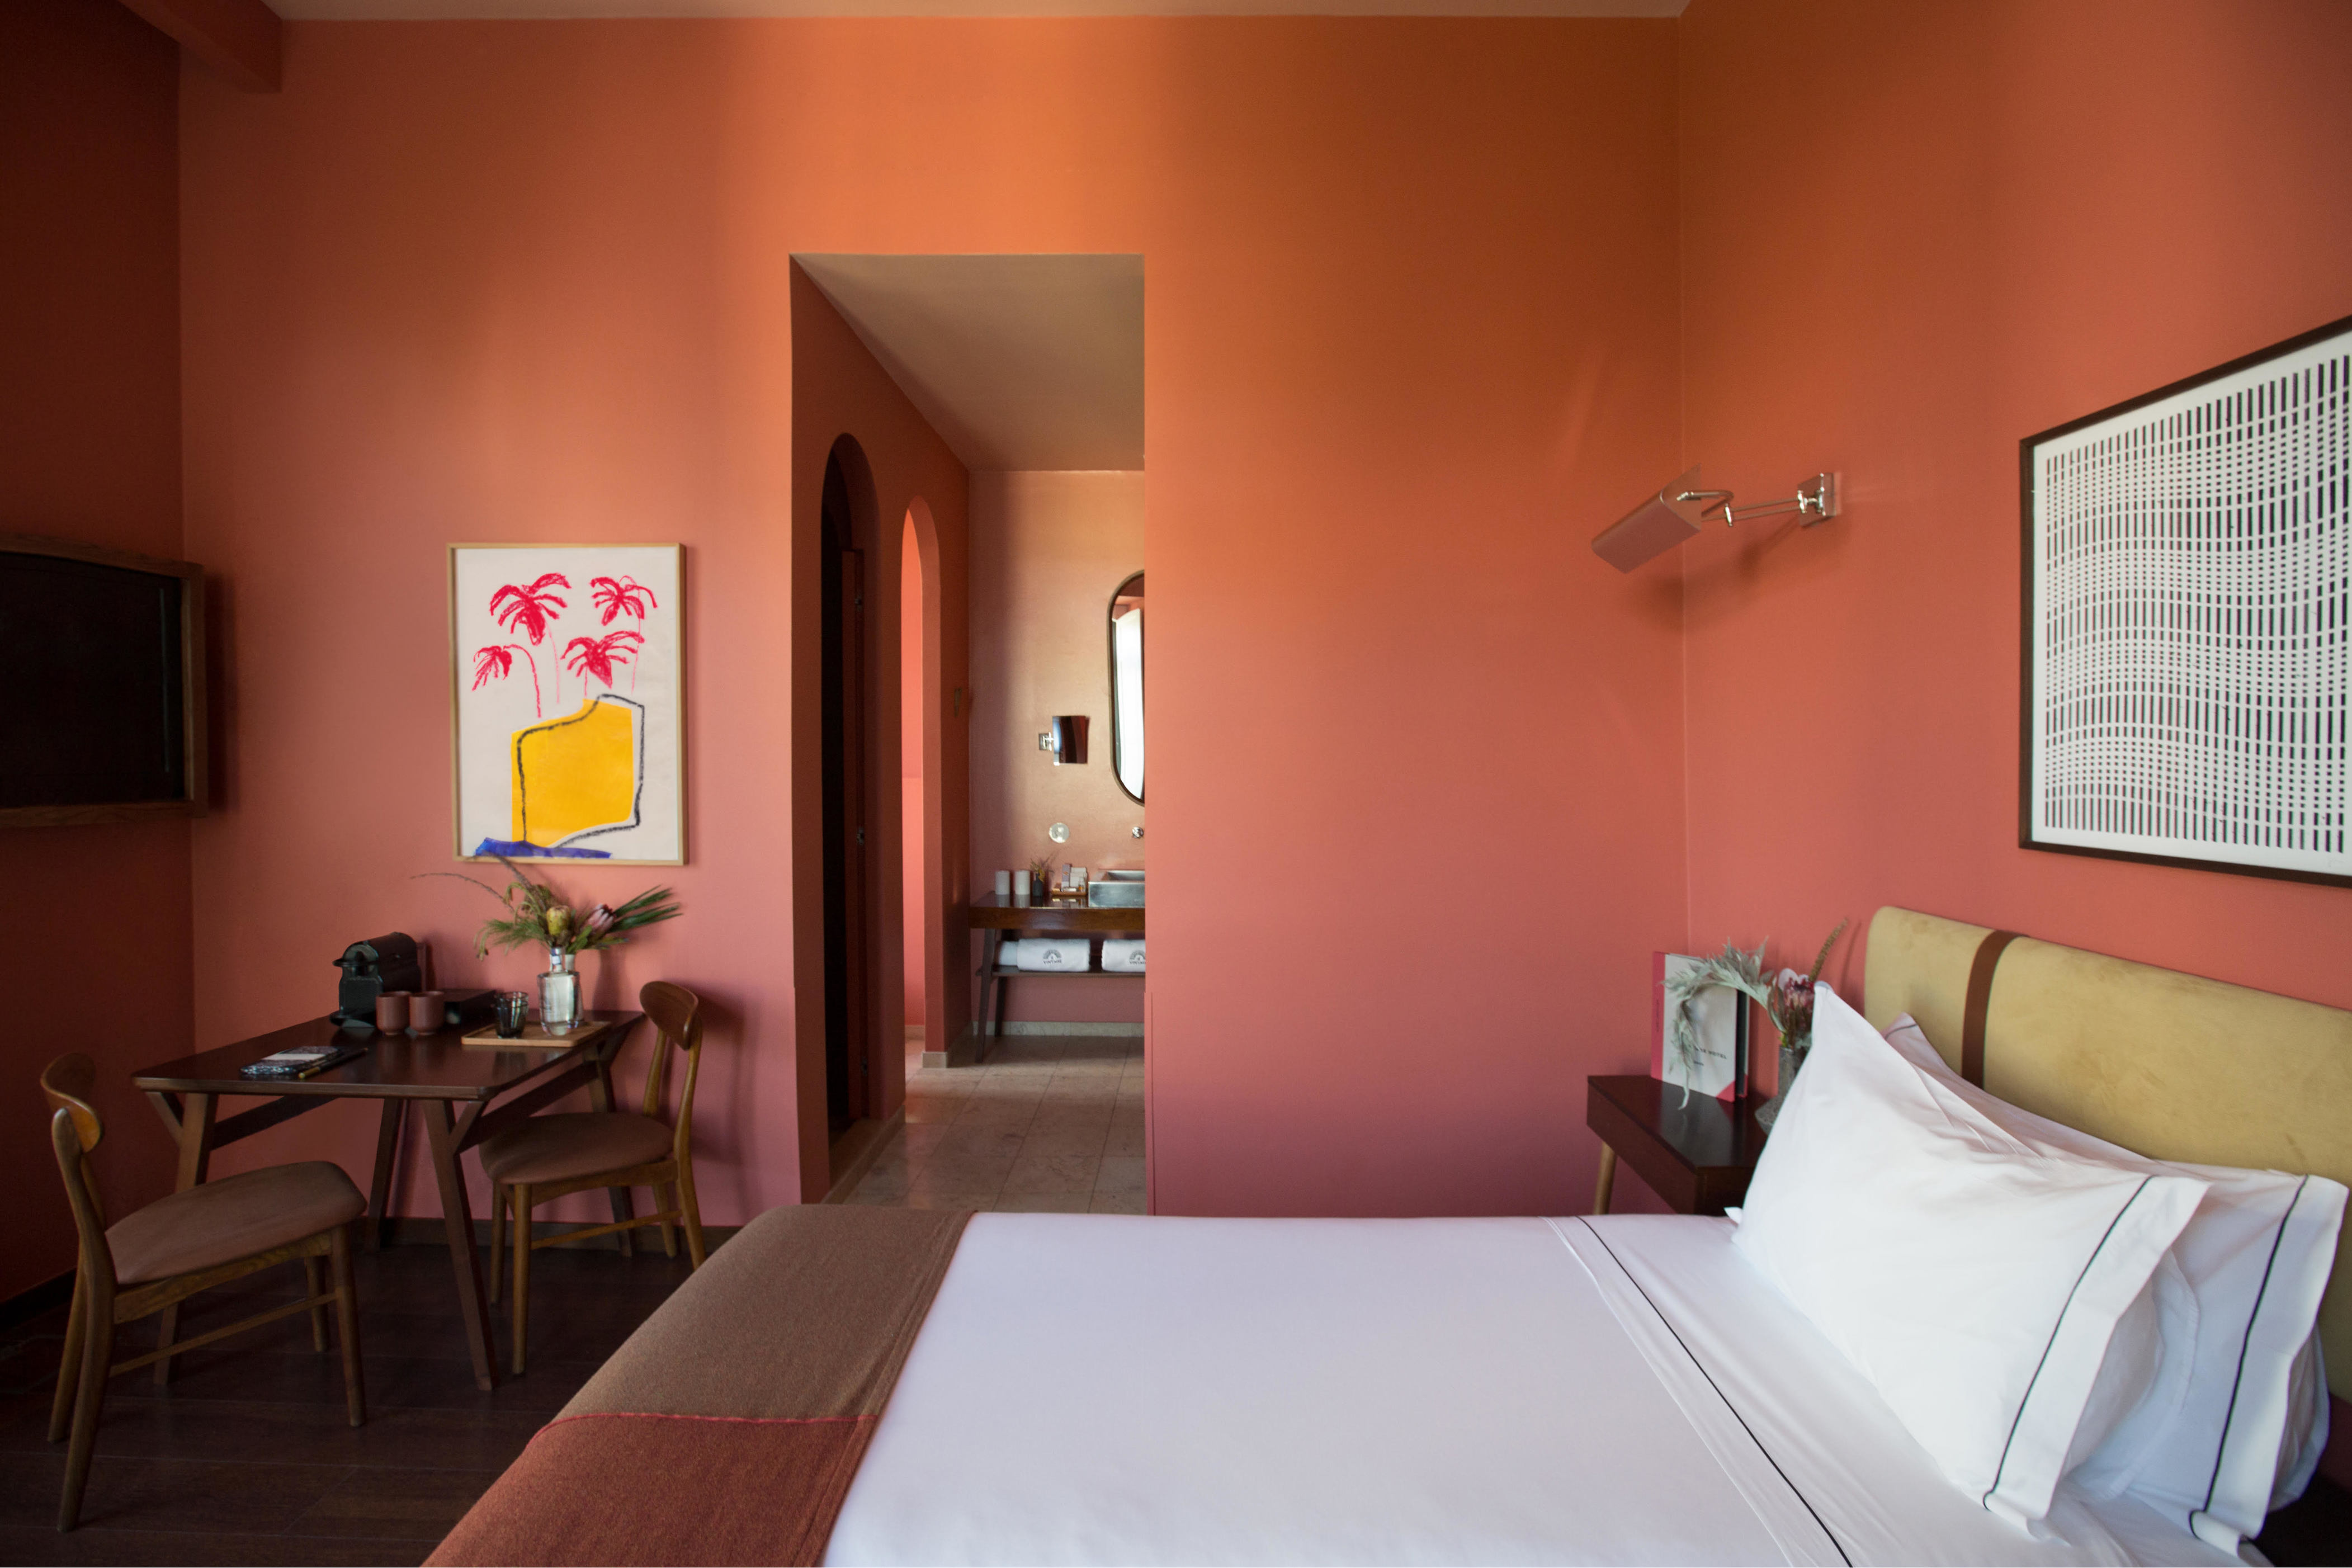 <p><strong>For frivolous fun</strong></p> <p>When in Lisbon, it’s only right that you should embrace the city’s love of all things beautiful—and The Vintage does so perfectly, with one-off art pieces dotted around the property and a chic mid-century theme throughout. The one-off boutique hotel is made up of 56 rooms and three suites—all of which contain a vintage bar cart, from which guests can make their own complimentary gin and tonics, and most with a view of the city. Lisbon is known for its many rooftop bars, but the V Rooftop Bar stands out from the (strong) competition thanks to the suspended vertical garden and could-be-in-<a href="https://www.cntraveler.com/destinations/los-angeles?mbid=synd_msn_rss&utm_source=msn&utm_medium=syndication">LA</a> vibe. —<em>Abigail Malbon</em></p> <p><strong>Price:</strong> Doubles from $163</p> <p><strong>Address:</strong> <a href="https://www.google.com/maps/place/The+Ivens/@38.7096235,-9.1404095,15z/data=!4m9!3m8!1s0xd19347ecbe5eafd:0xf92622b1d6536556!5m2!4m1!1i2!8m2!3d38.7096235!4d-9.1404095!16s%252Fg%252F11g8wj1yys">R. Capelo 5, 1200-224 Lisboa, Portugal</a></p> <div class="callout"><p><a href="https://cna.st/affiliate-link/kDoCfXgWoowzcCrft4cjg269nX2GW9jBF5NB1VqCsMP9kpfnaLLc68P21ZW2fkGz4Mt5FnzuKpmKntt2MWietuP47R9Sjmf5c6y6dLE1sLaKbXuKwibEJnJp2WWvTVRCmdQfsTPAVxLHnZnc8YzUzkmkdinSXXXFgHSkkirQvKwfajMb1fJ6P68PqVxzV5U2QL54J6pKGycV3MzjaAiLvdPGoXJsLbCWK" rel="sponsored" title="Book now at Expedia">Book now at Expedia</a></p> <p><a href="https://cna.st/affiliate-link/4Q5NDE1dgN4W3hpebNBtgnhuNLQVW3dJh9TpbLL6gnKxuSC3iGDLopTBxuhtXuJoo953FChSmpqzXV63fkXwJfPQbcAVwwDxkEWjwRsvCGm9PmhRY68Ns7c7ZCnr39VJ4TzYMLB6UNMvKCz2ZbNPAgPfQHw9WMzjwbkYMPZ4HrX" rel="sponsored" title="Book now at Booking.com">Book now at Booking.com</a></p> </div><p>Sign up to receive the latest news, expert tips, and inspiration on all things travel</p><a href="https://www.cntraveler.com/newsletter/the-daily?sourceCode=msnsend">Inspire Me</a>